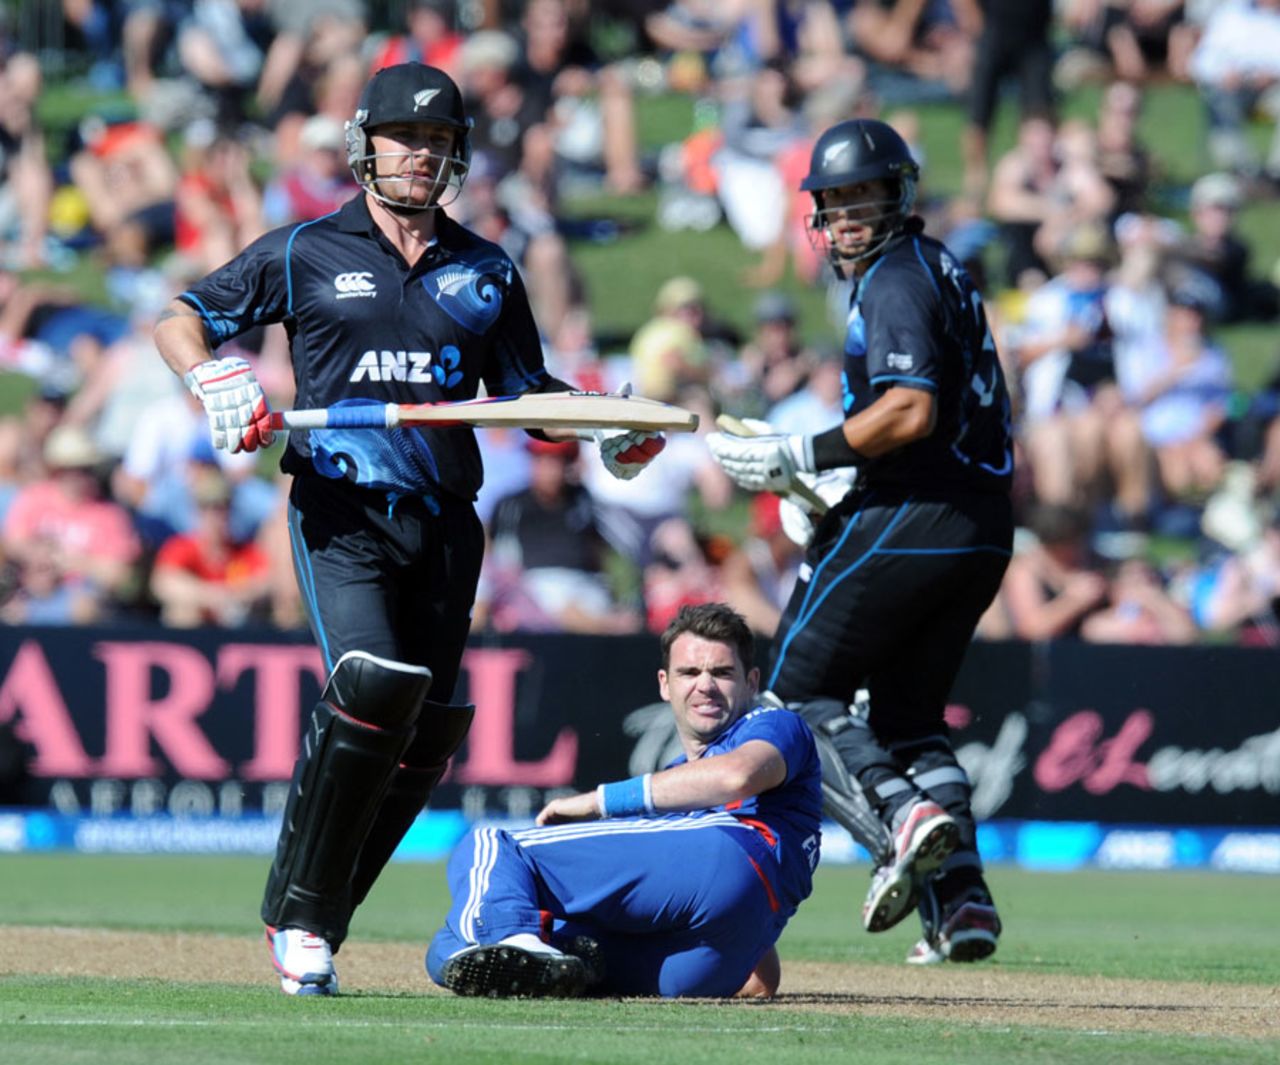 Brendon McCullum and Ross Taylor put on a century stand, New Zealand v England, 2nd ODI, Napier, February 20, 2013